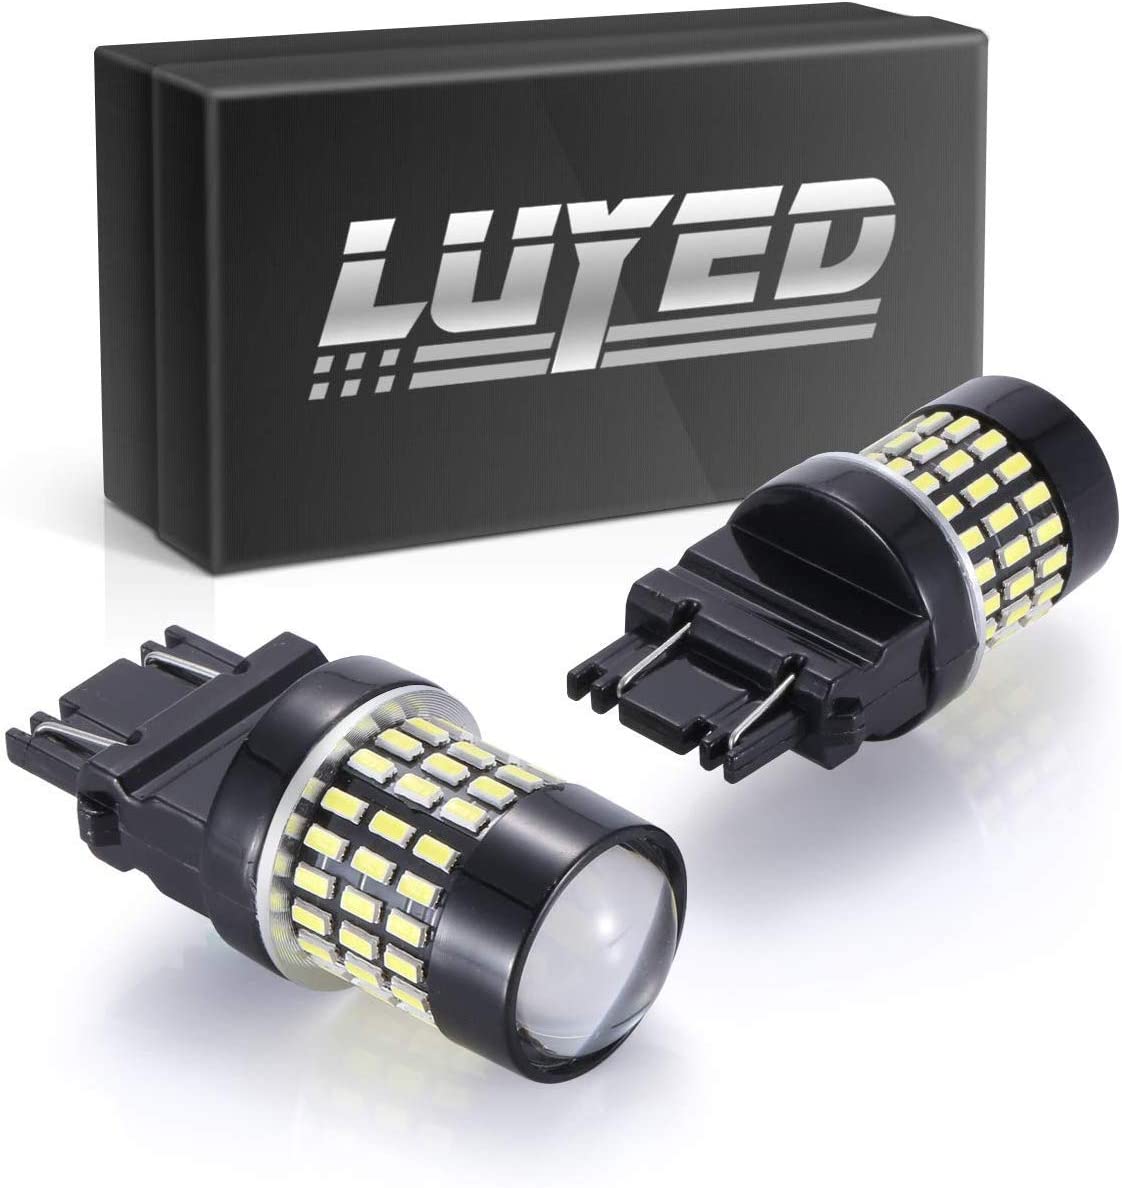 LUYED 2 X 900 Lumens Super Bright 3014 Chipsets 3056 3156 3057 3057K 3157 4157 LED Bulbs with Projector for Tail Lights Turn Signal Lights,Xenon White